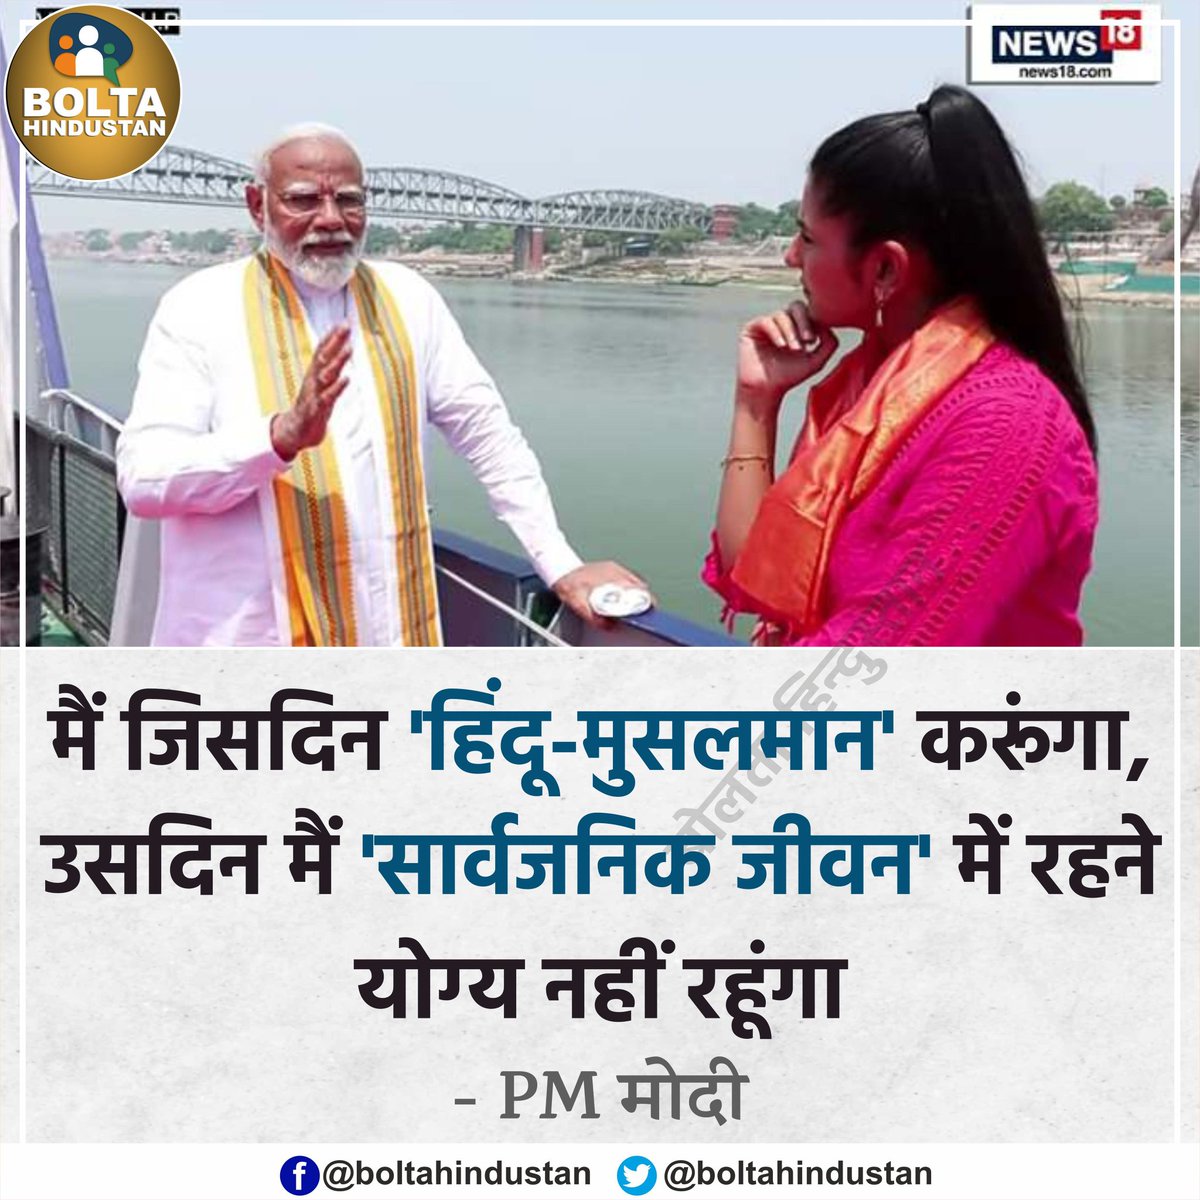 He is lying brazenly! She is pretending to listen carefully. 

- Neither the speaker is concerned about Hindus nor the listener is concerned about Muslims! Both are concerned only with money and power!

#GodiMedia 
#modihatespeech